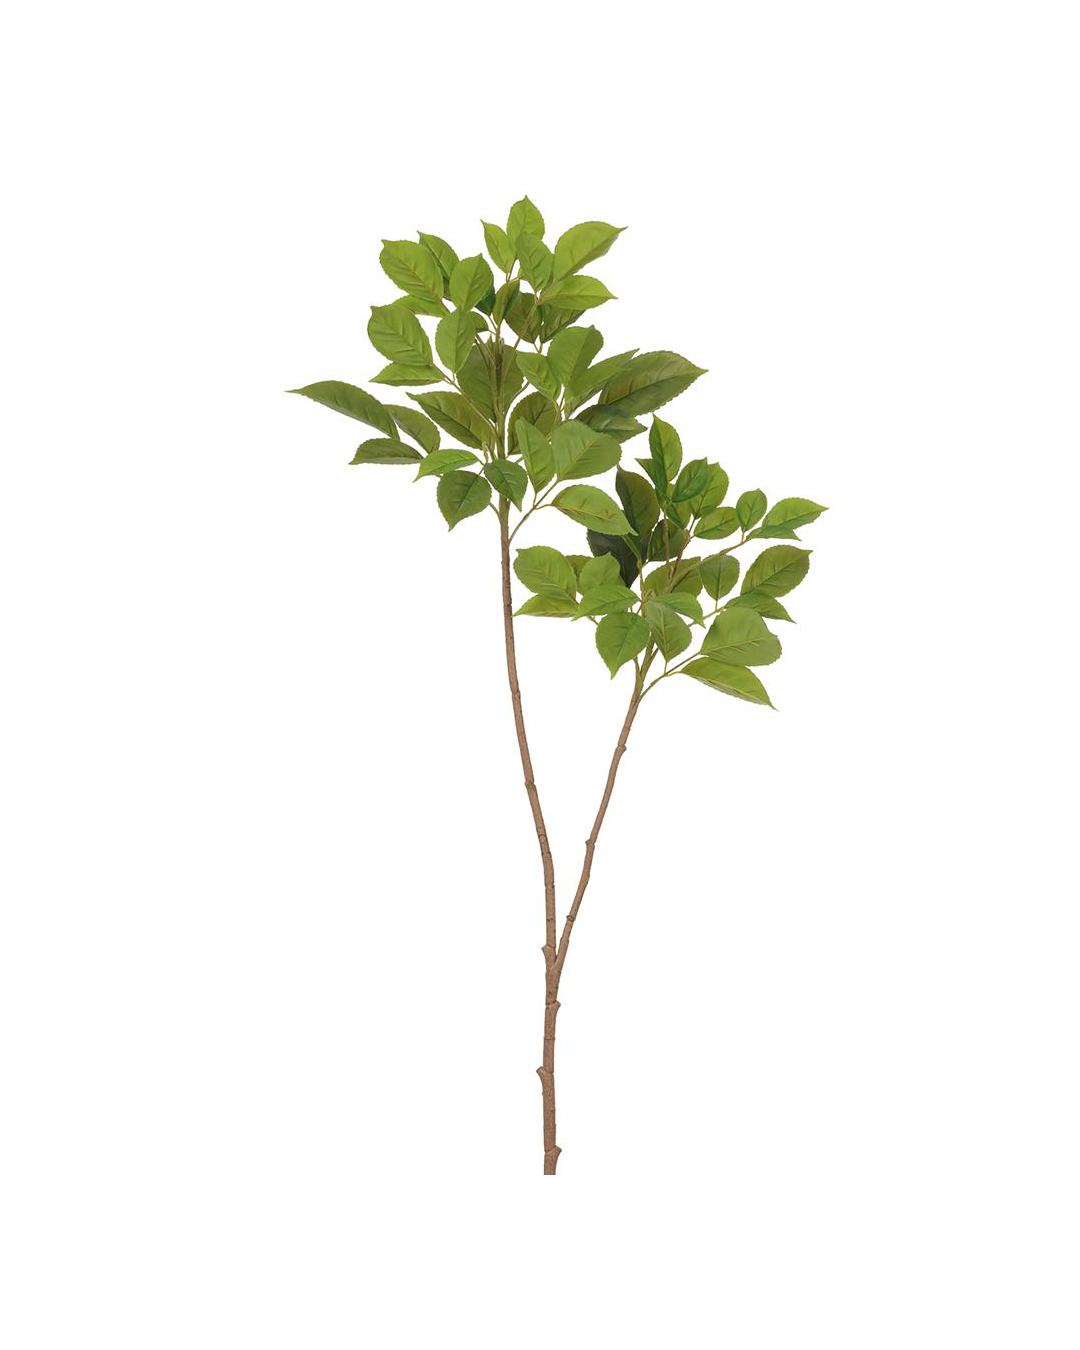 A young tree with a slender brown trunk and vibrant green leaves, isolated against the plain white background of a Scottsdale, Arizona bungalow. AllState Floral And Craft&#39;s 41.5&quot; Green Bishop Wood Branch.